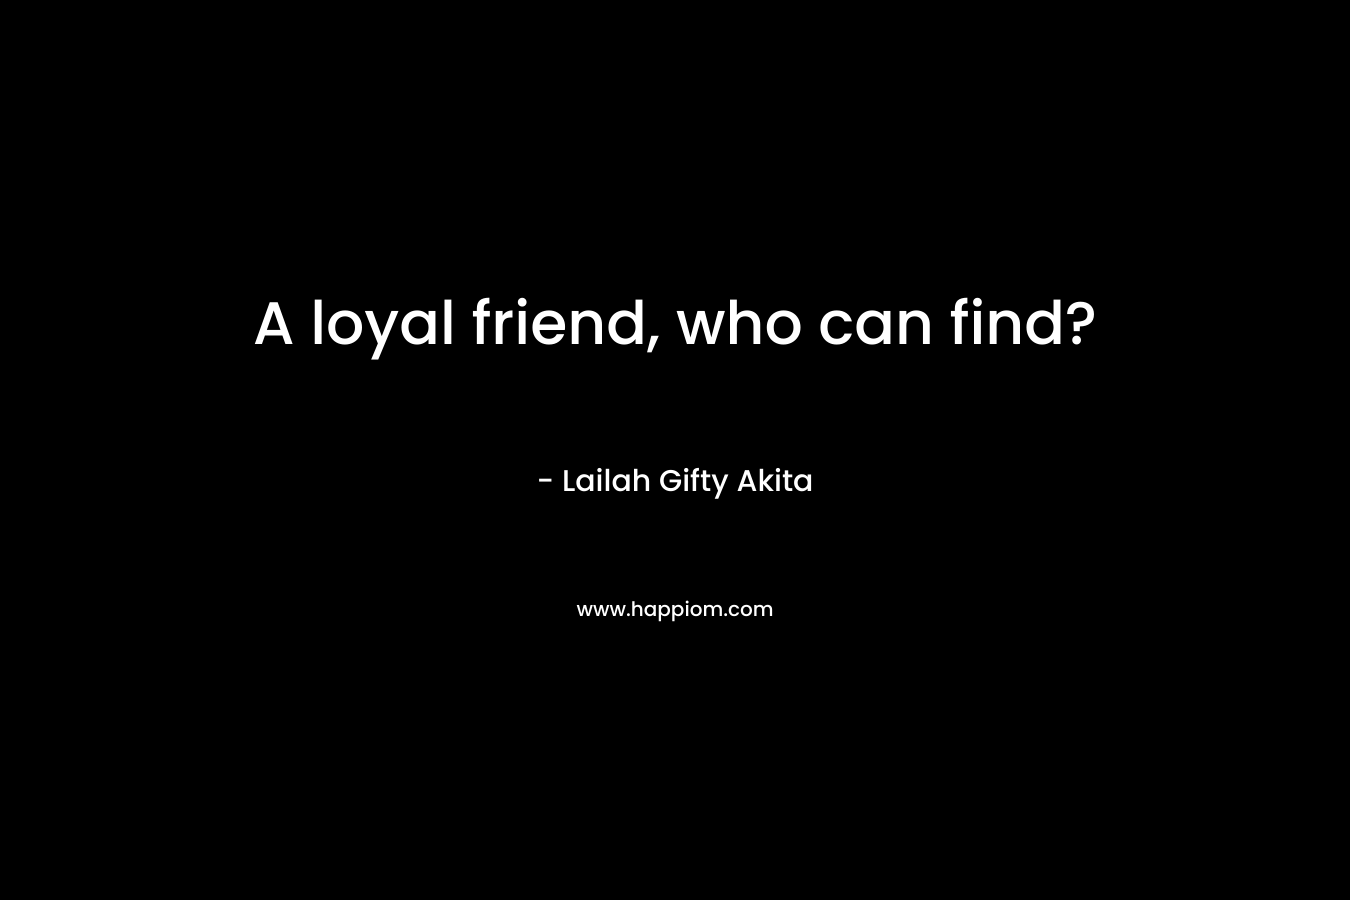 A loyal friend, who can find?